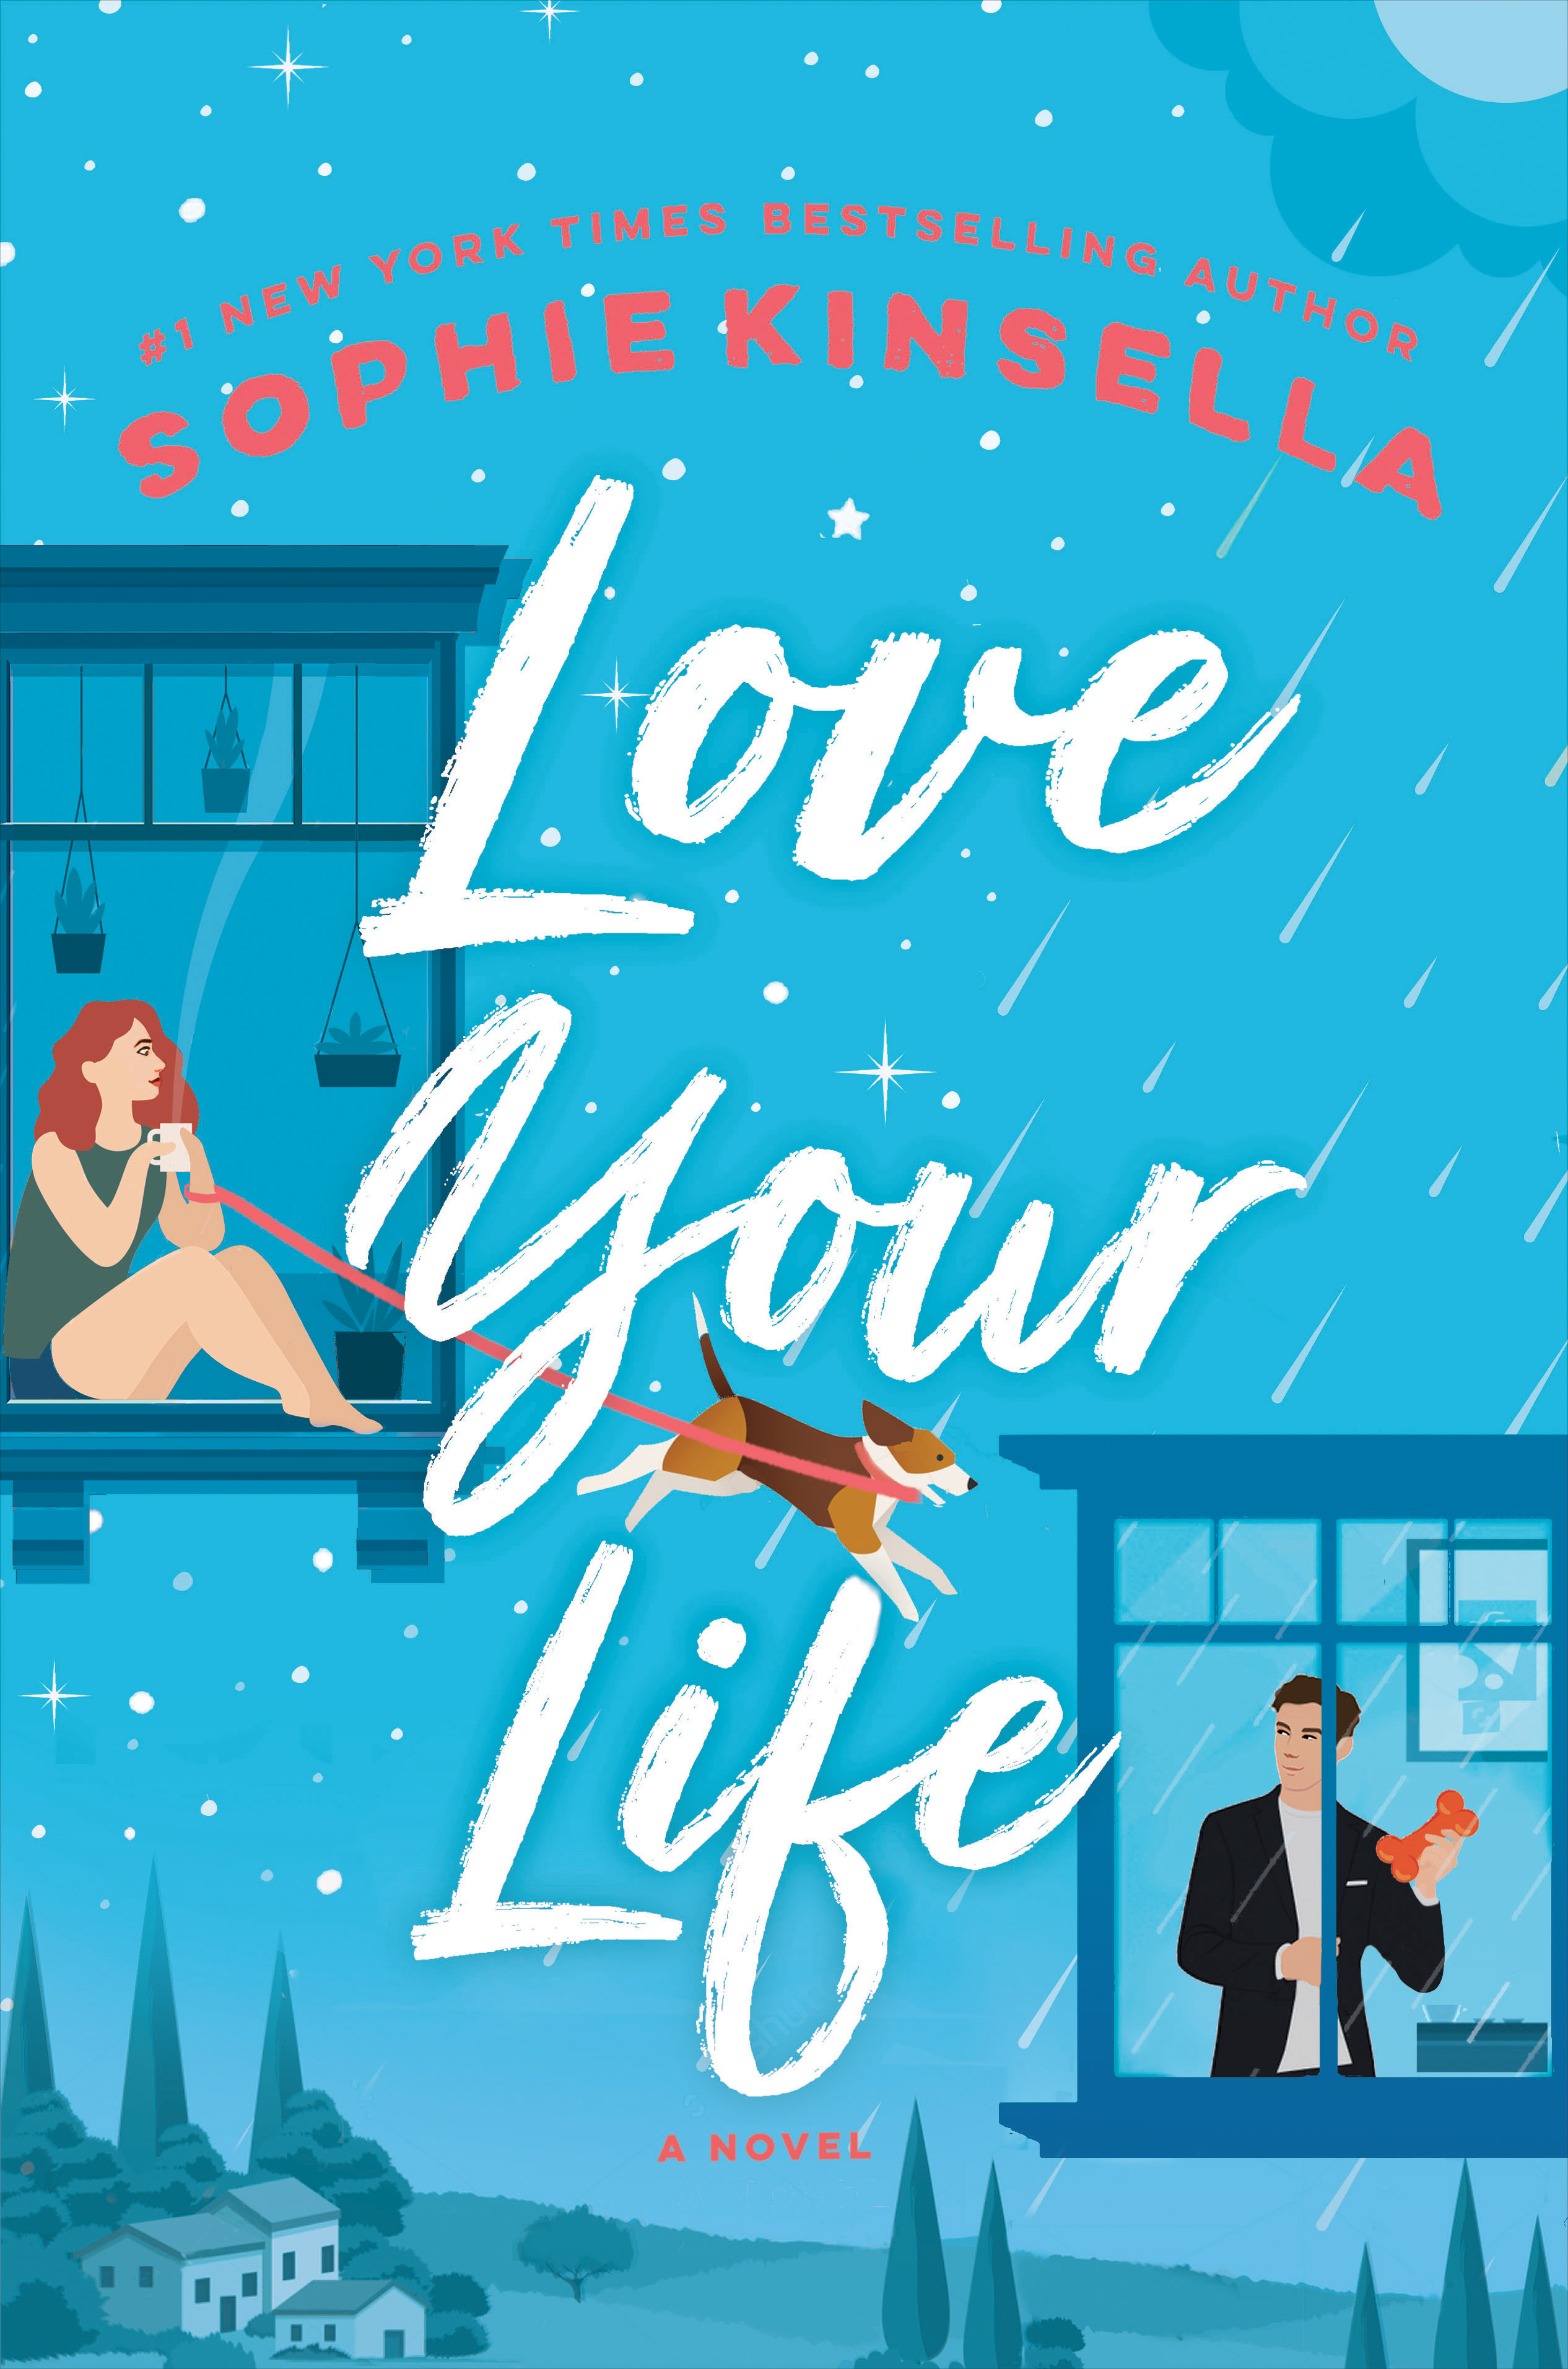 Love Your Life by Sophie Kinsella